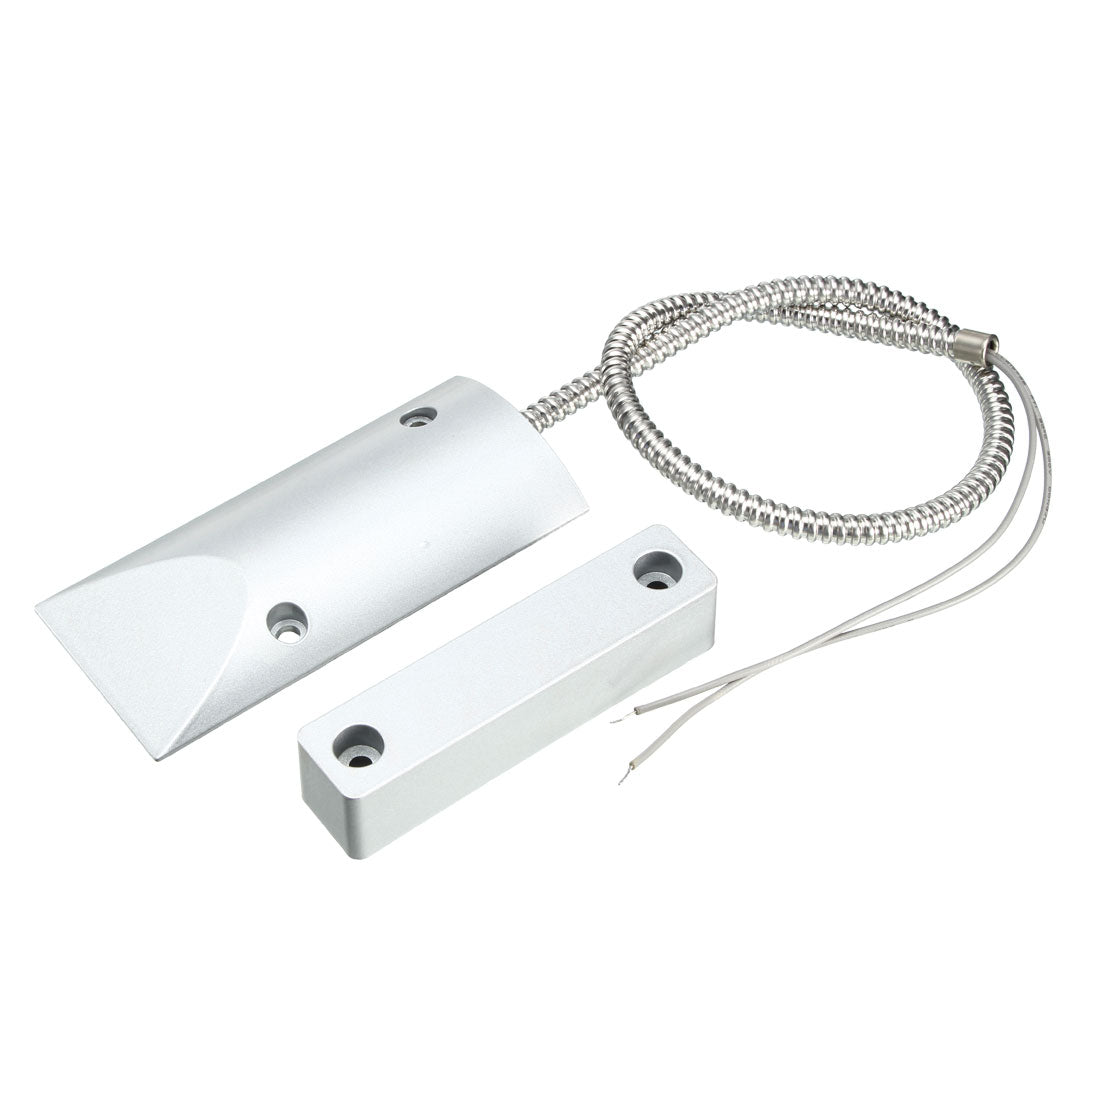 uxcell Uxcell OC-60 N.O. Alarm Security Rolling Gate Garage Door Contact Magnetic Reed Switch